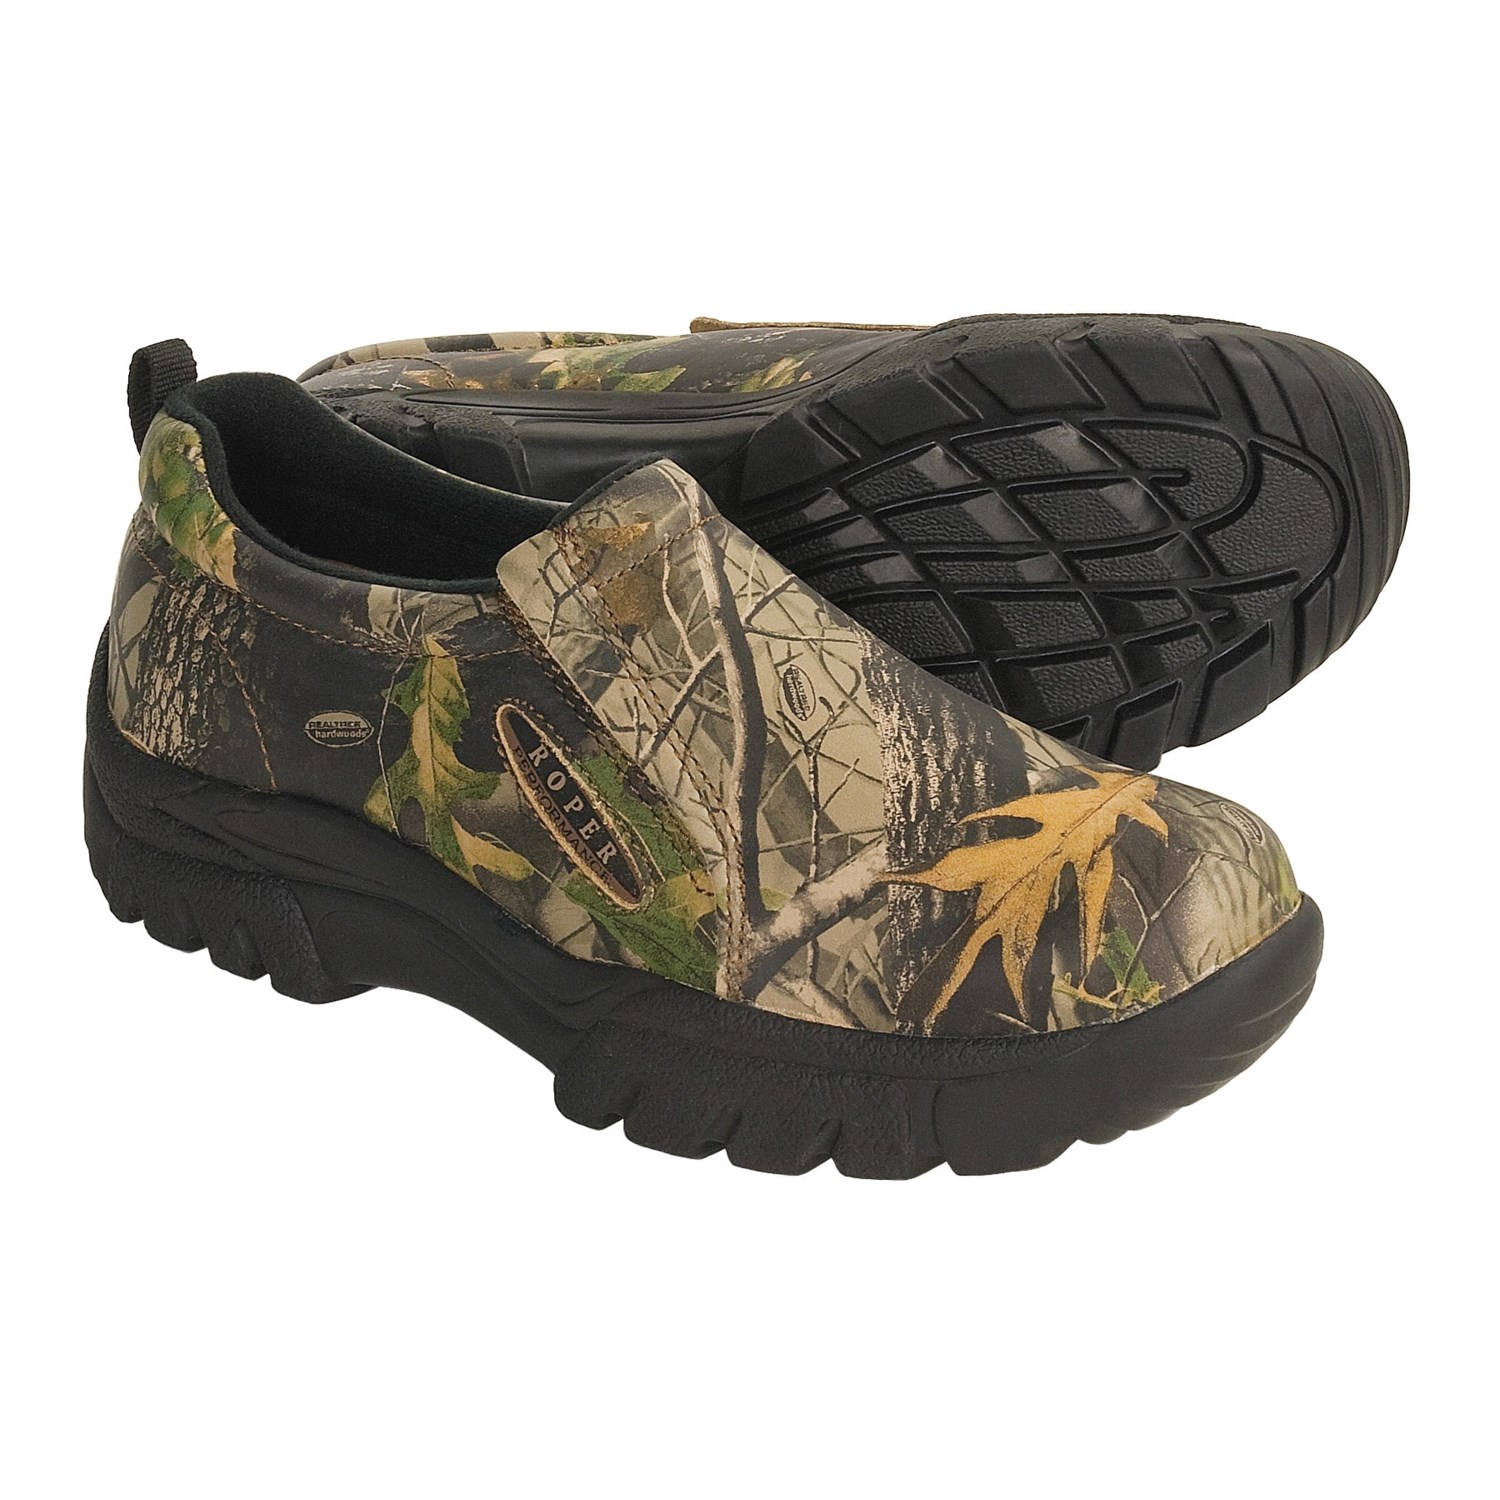 Roper Camouflage High-Performance Shoes (For Men) 2439X - Save 42%